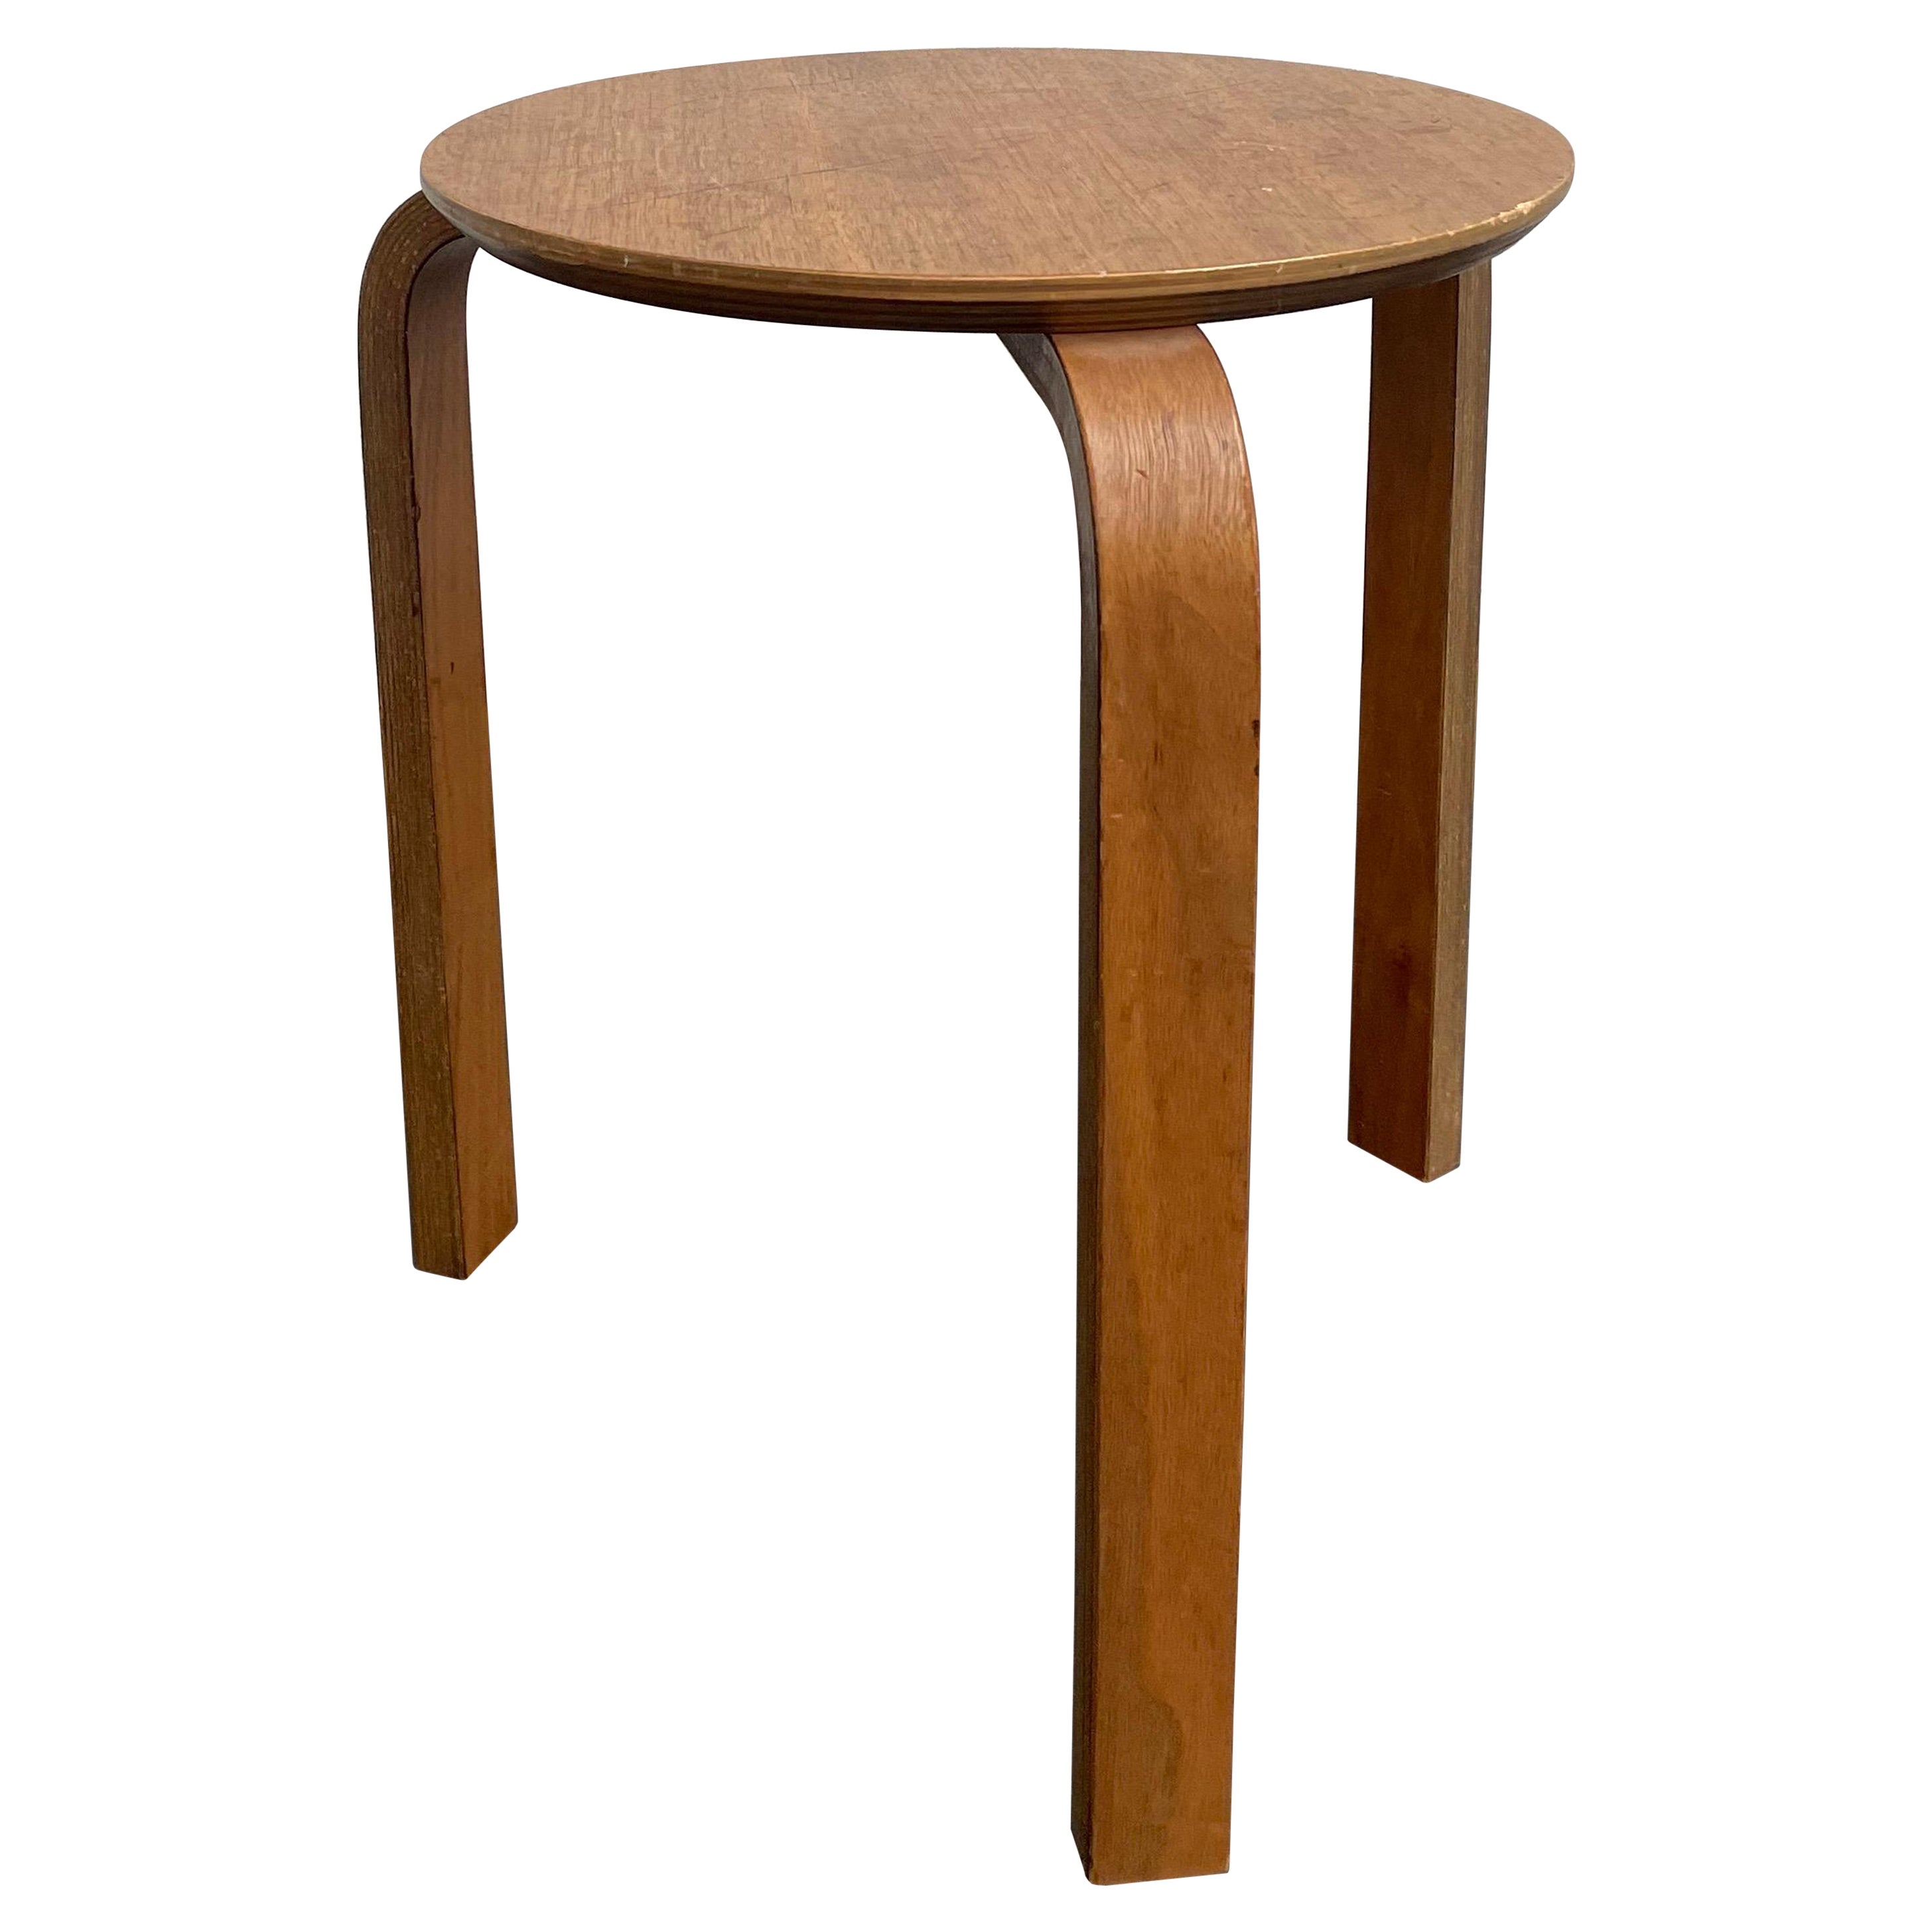 Danish Bentwood Side Table/Stool, 2 Available